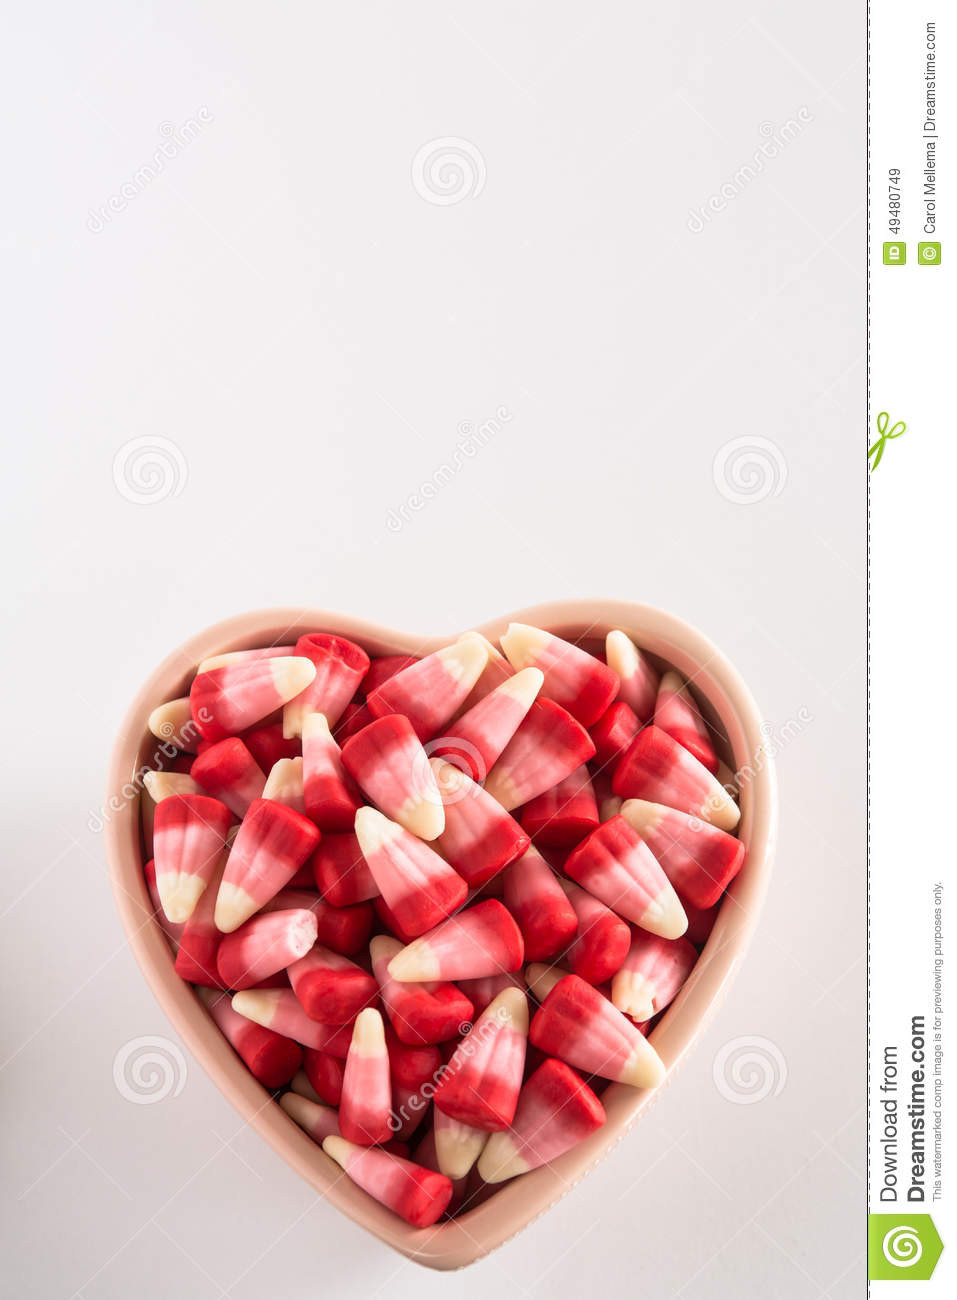 Valentines Day Candy Corn
 Valentines Day Candy Corn In Heart Shaped Bowl Stock Image